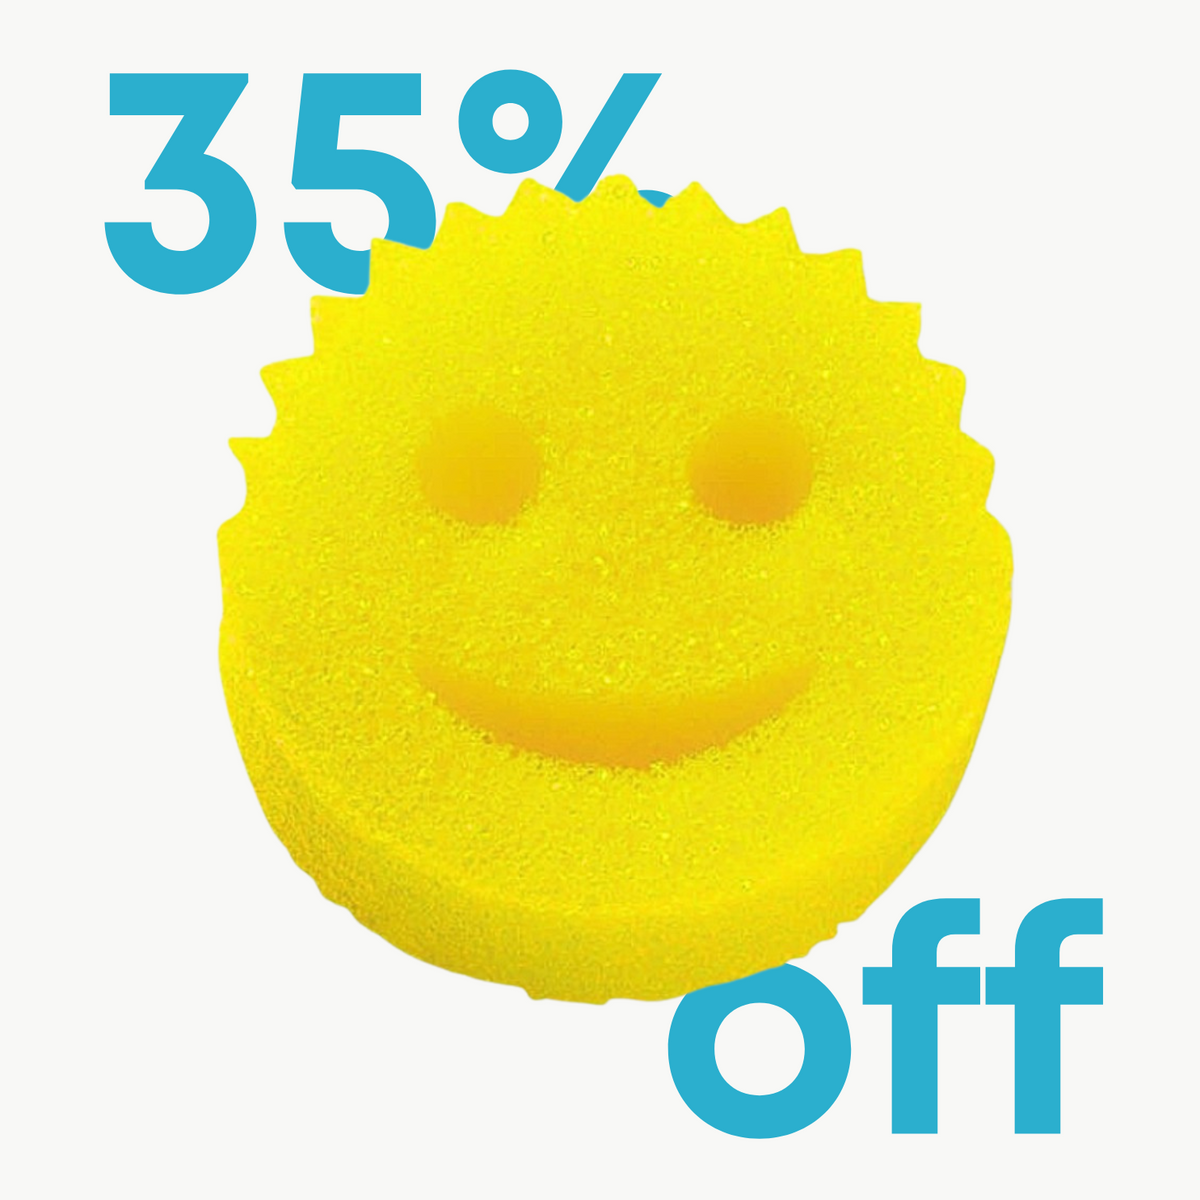 Scrub Daddy Smiley Holder A Happier Way to Keep Your Dishes and